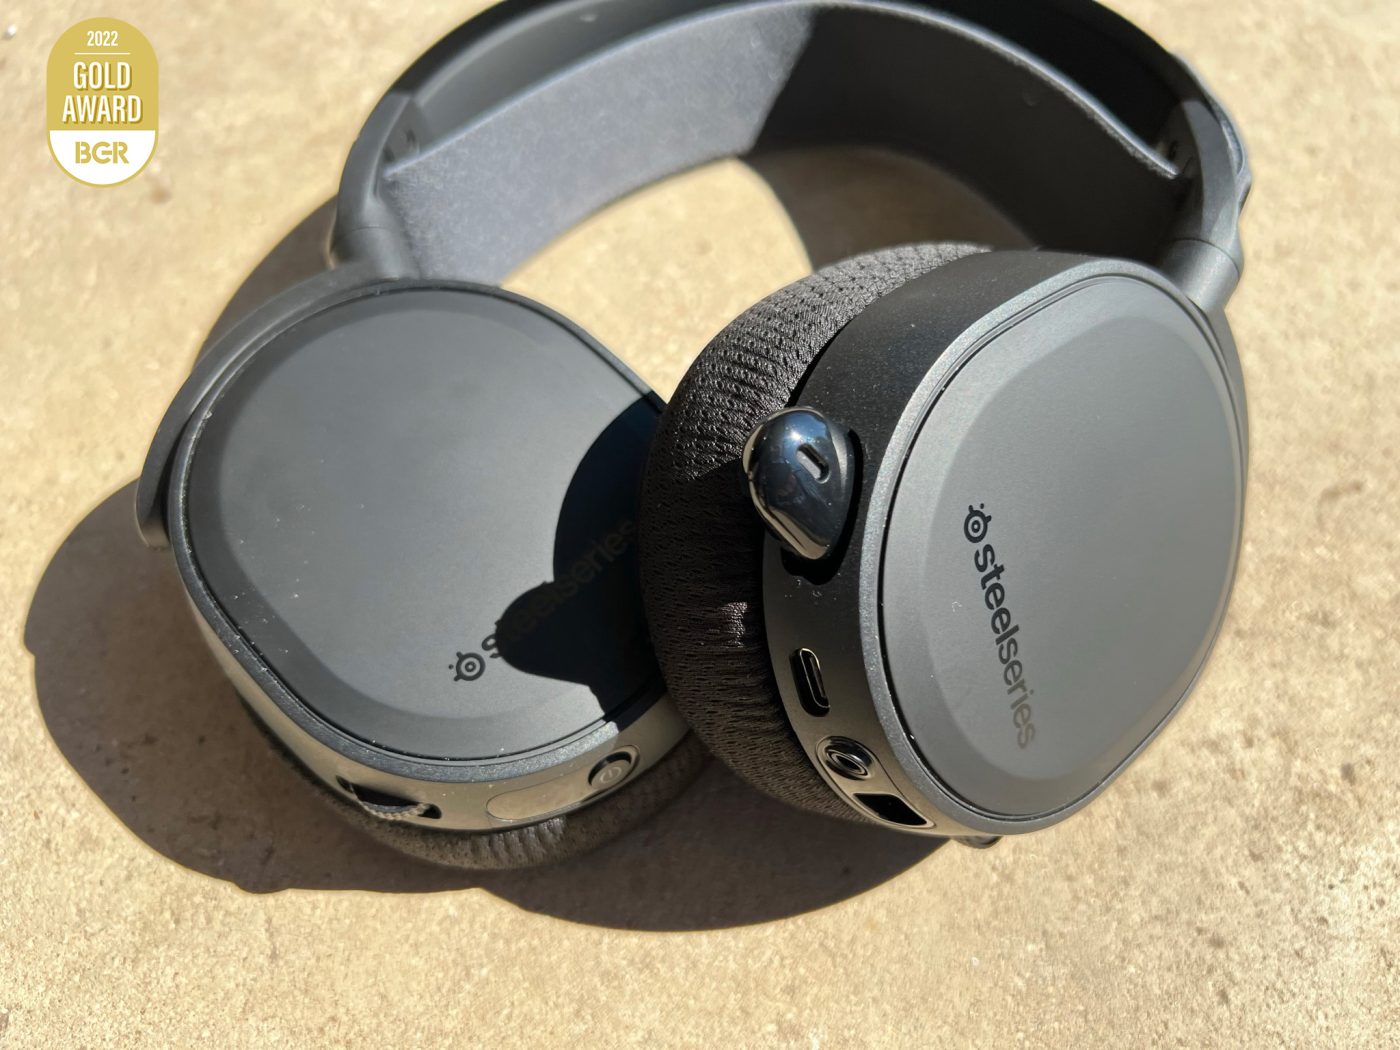 New SteelSeries Arctis 7+ Wireless Impressions - Improving Upon the Best